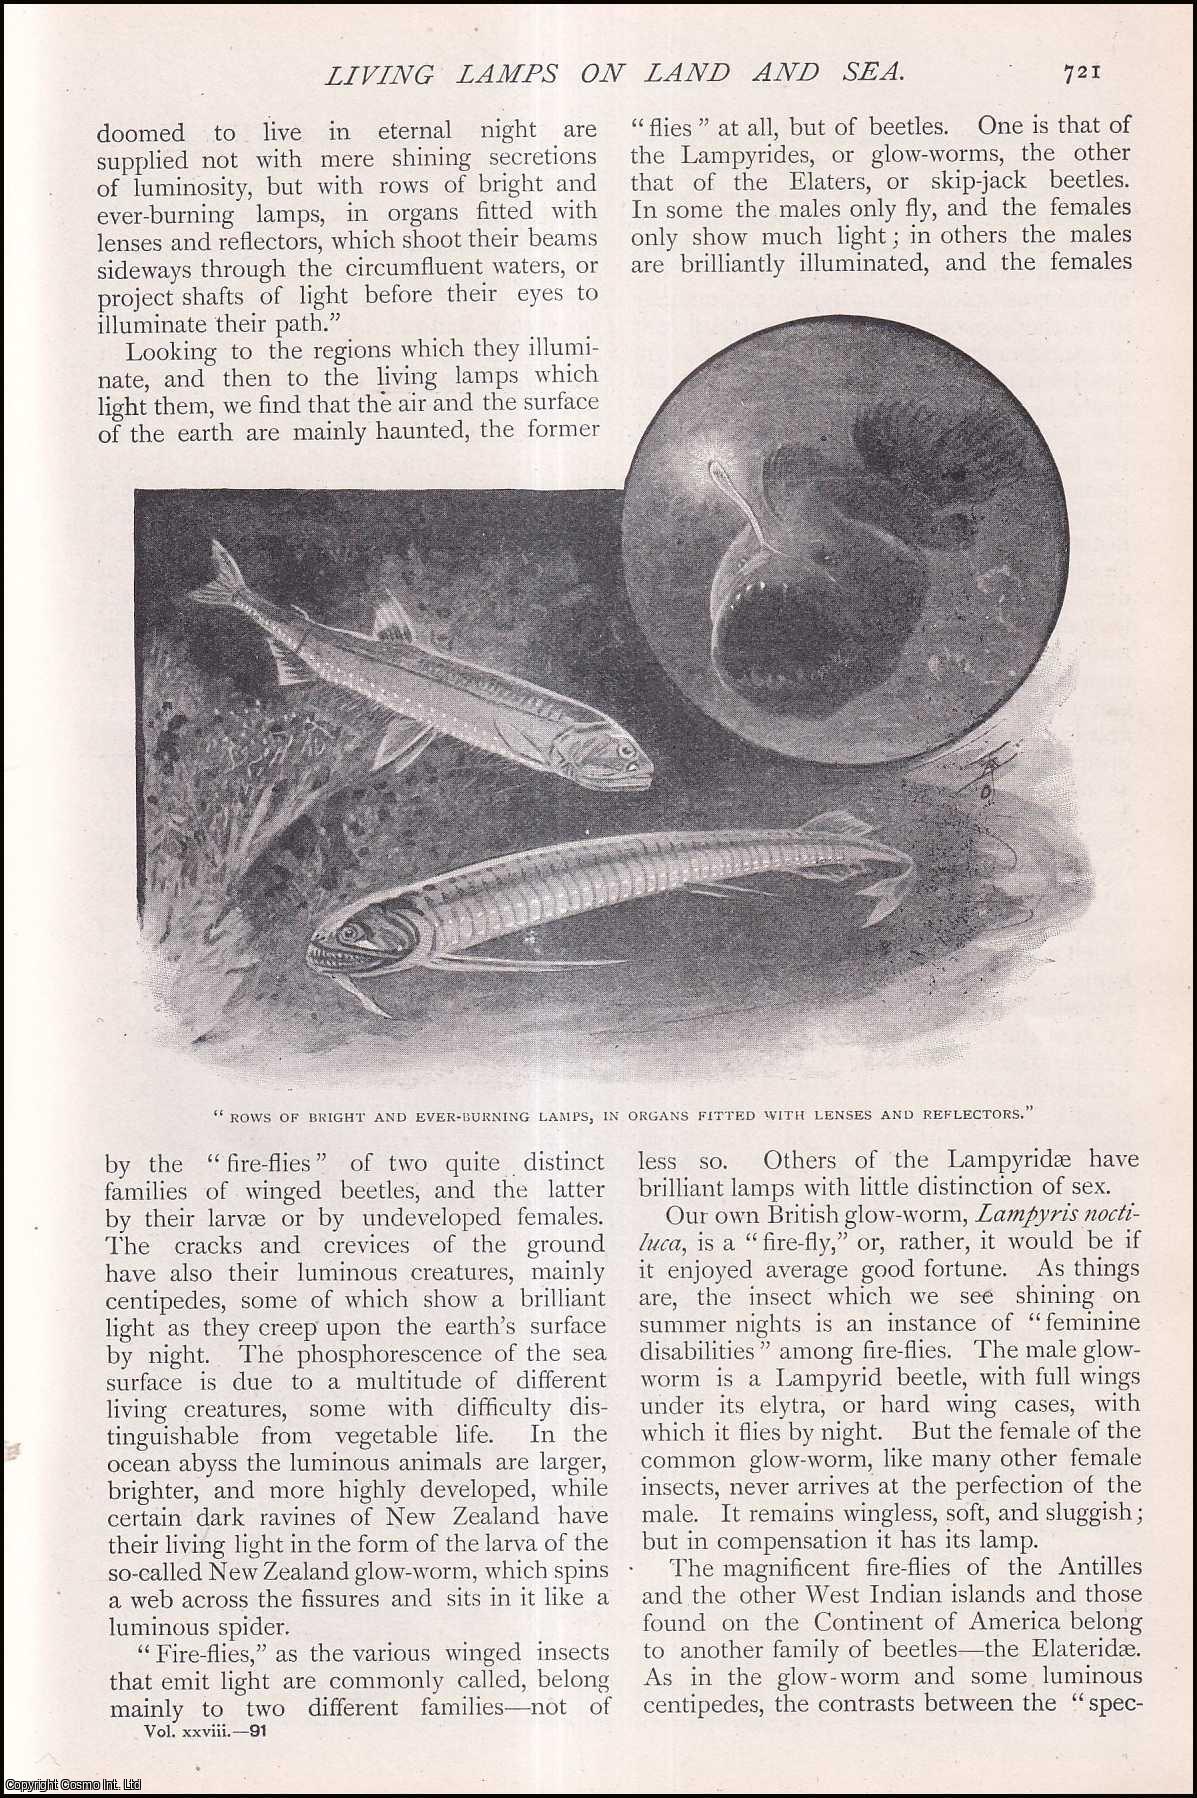 C.J. Cornish, F.Z.S. - Living Lamps on Land and Sea. Luminous creatures. An uncommon original article from The Strand Magazine, 1904.